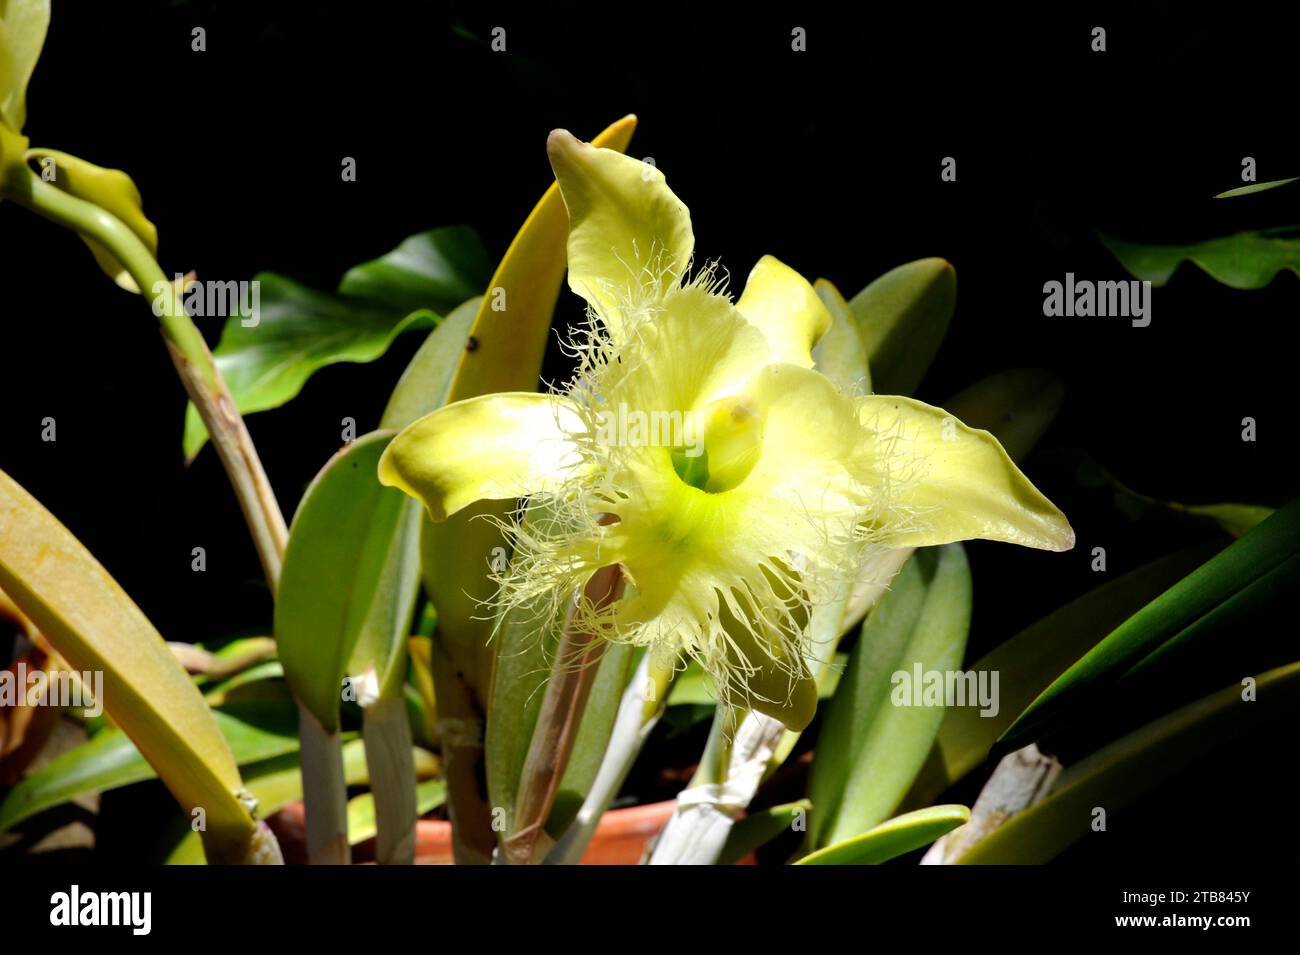 Rhyncholaelia digbyana is an ornamentalorchid native to Central America and Mexico. Stock Photo